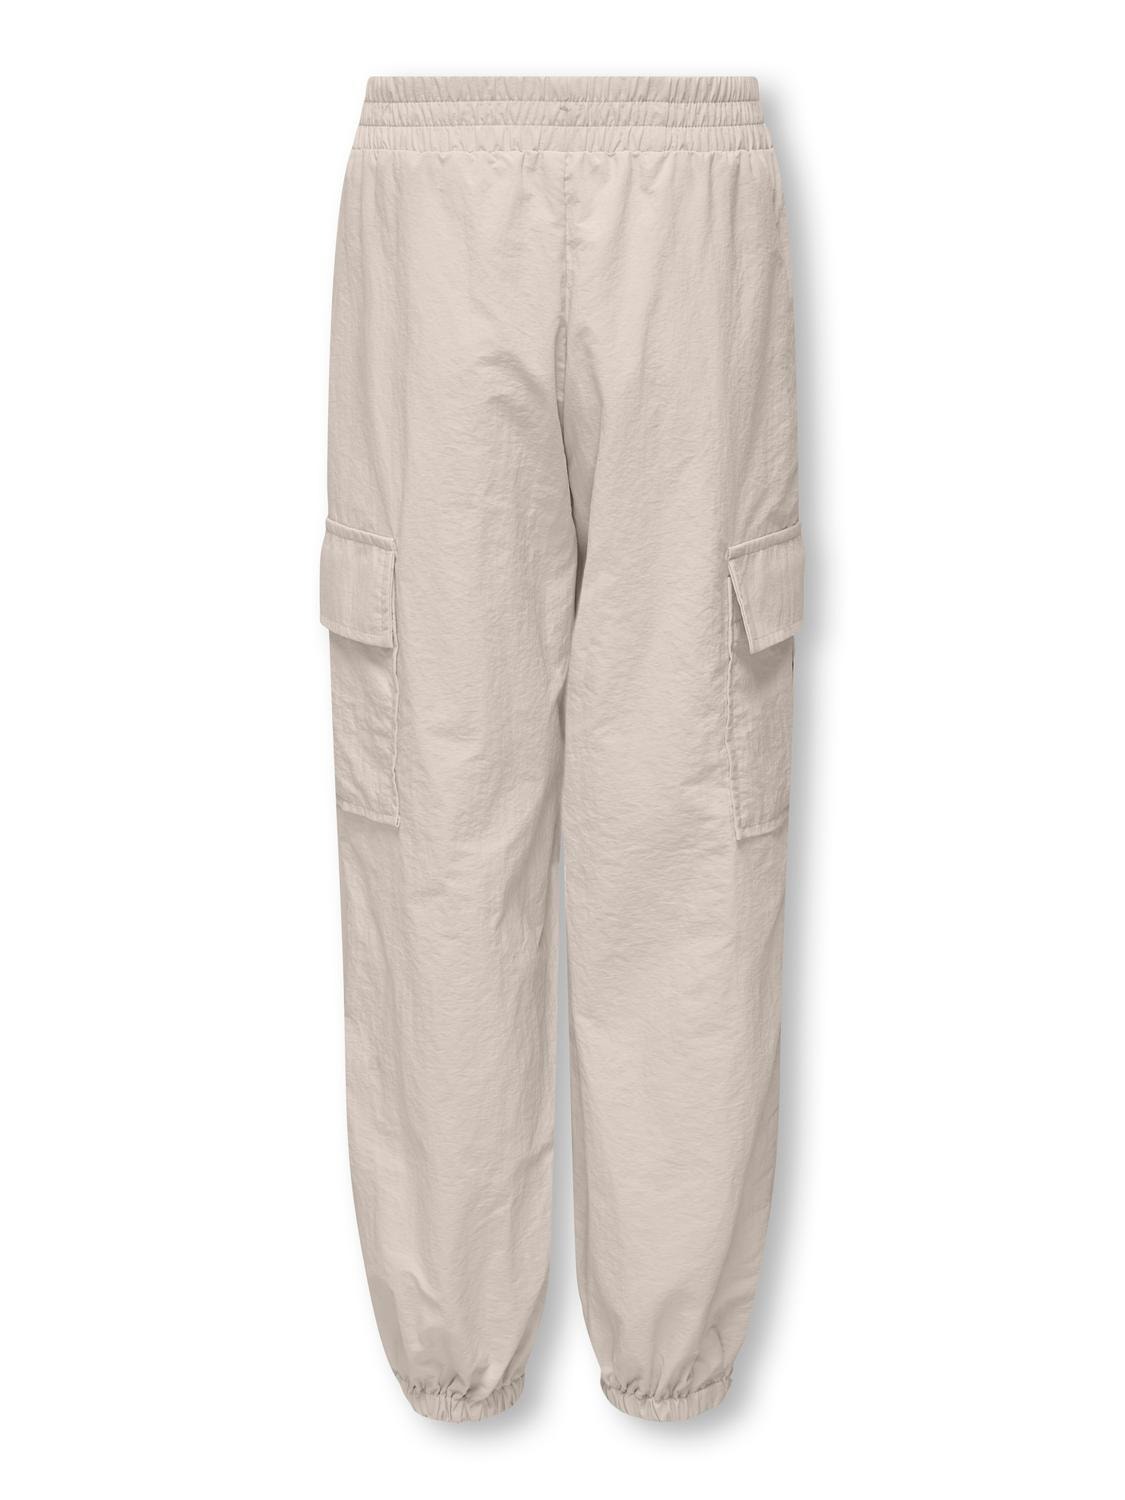 ONLY Cargo trousers with mid waist -Pumice Stone - 15304165